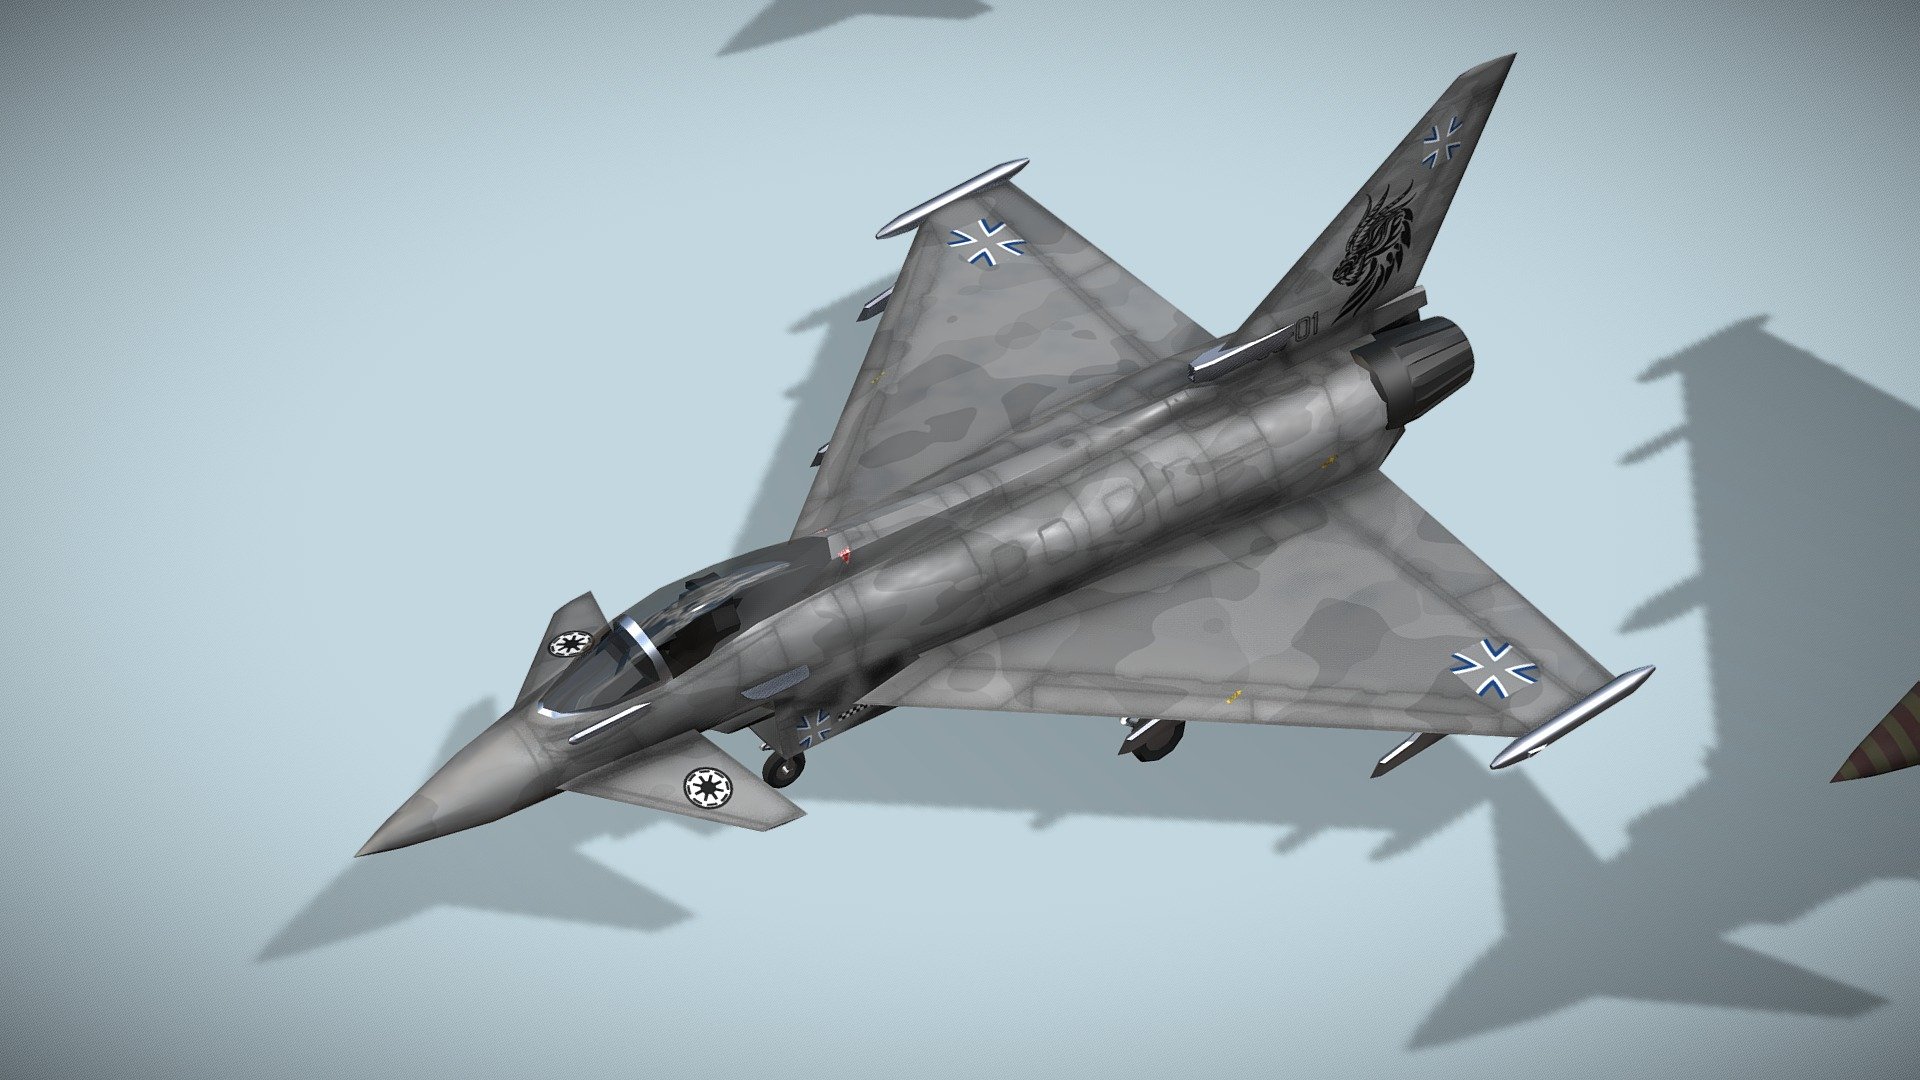 Eurofighter Typhoon EF-2000

Lowpoly model of european jet fighter.



Eurofighter Typhoon is a European multinational twin-engine, canard delta wing, multirole fighter. Typhoon was designed originally as an air superiority fighter and is manufactured by a consortium of Airbus, BAE Systems and Leonardo that conducts the majority of the project through a joint holding company. The aircraft's development effectively began in 1983 with the Future European Fighter Aircraft programme, a multinational collaboration among the UK, Germany, France, Italy and Spain. Eurofighter prototype made its maiden flight on 27 March 1994. The aircraft's name, Typhoon, was adopted in September 1998 and the first production contracts were also signed that year.



1 standing version and 2 flying versions in set.

Model has bump map, roughness map and 3 x diffuse textures.



Check also my other aircrafts and cars.

Patreon with monthly free model - Eurofighter Typhoon EF-2000 jet fighter - Buy Royalty Free 3D model by NETRUNNER_pl 3d model